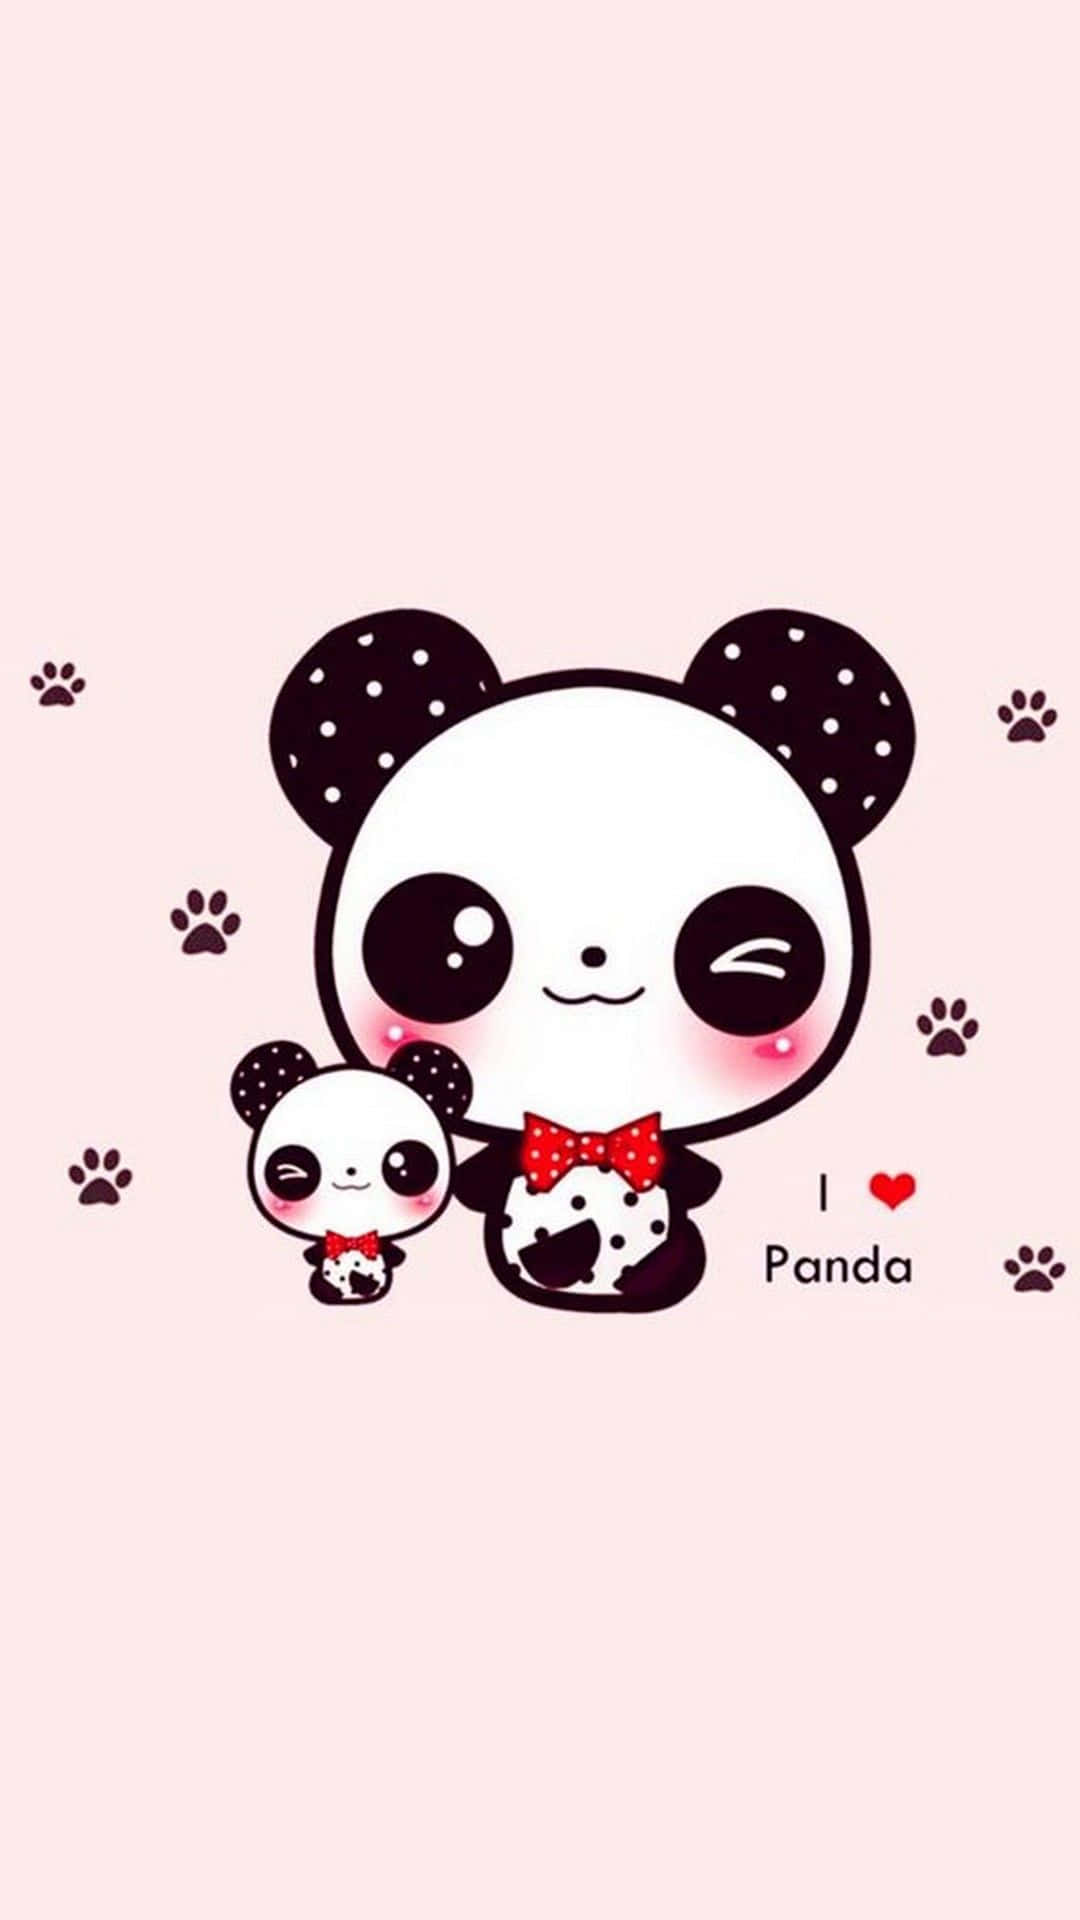 Chilling Out with a Kawaii Panda Wallpaper